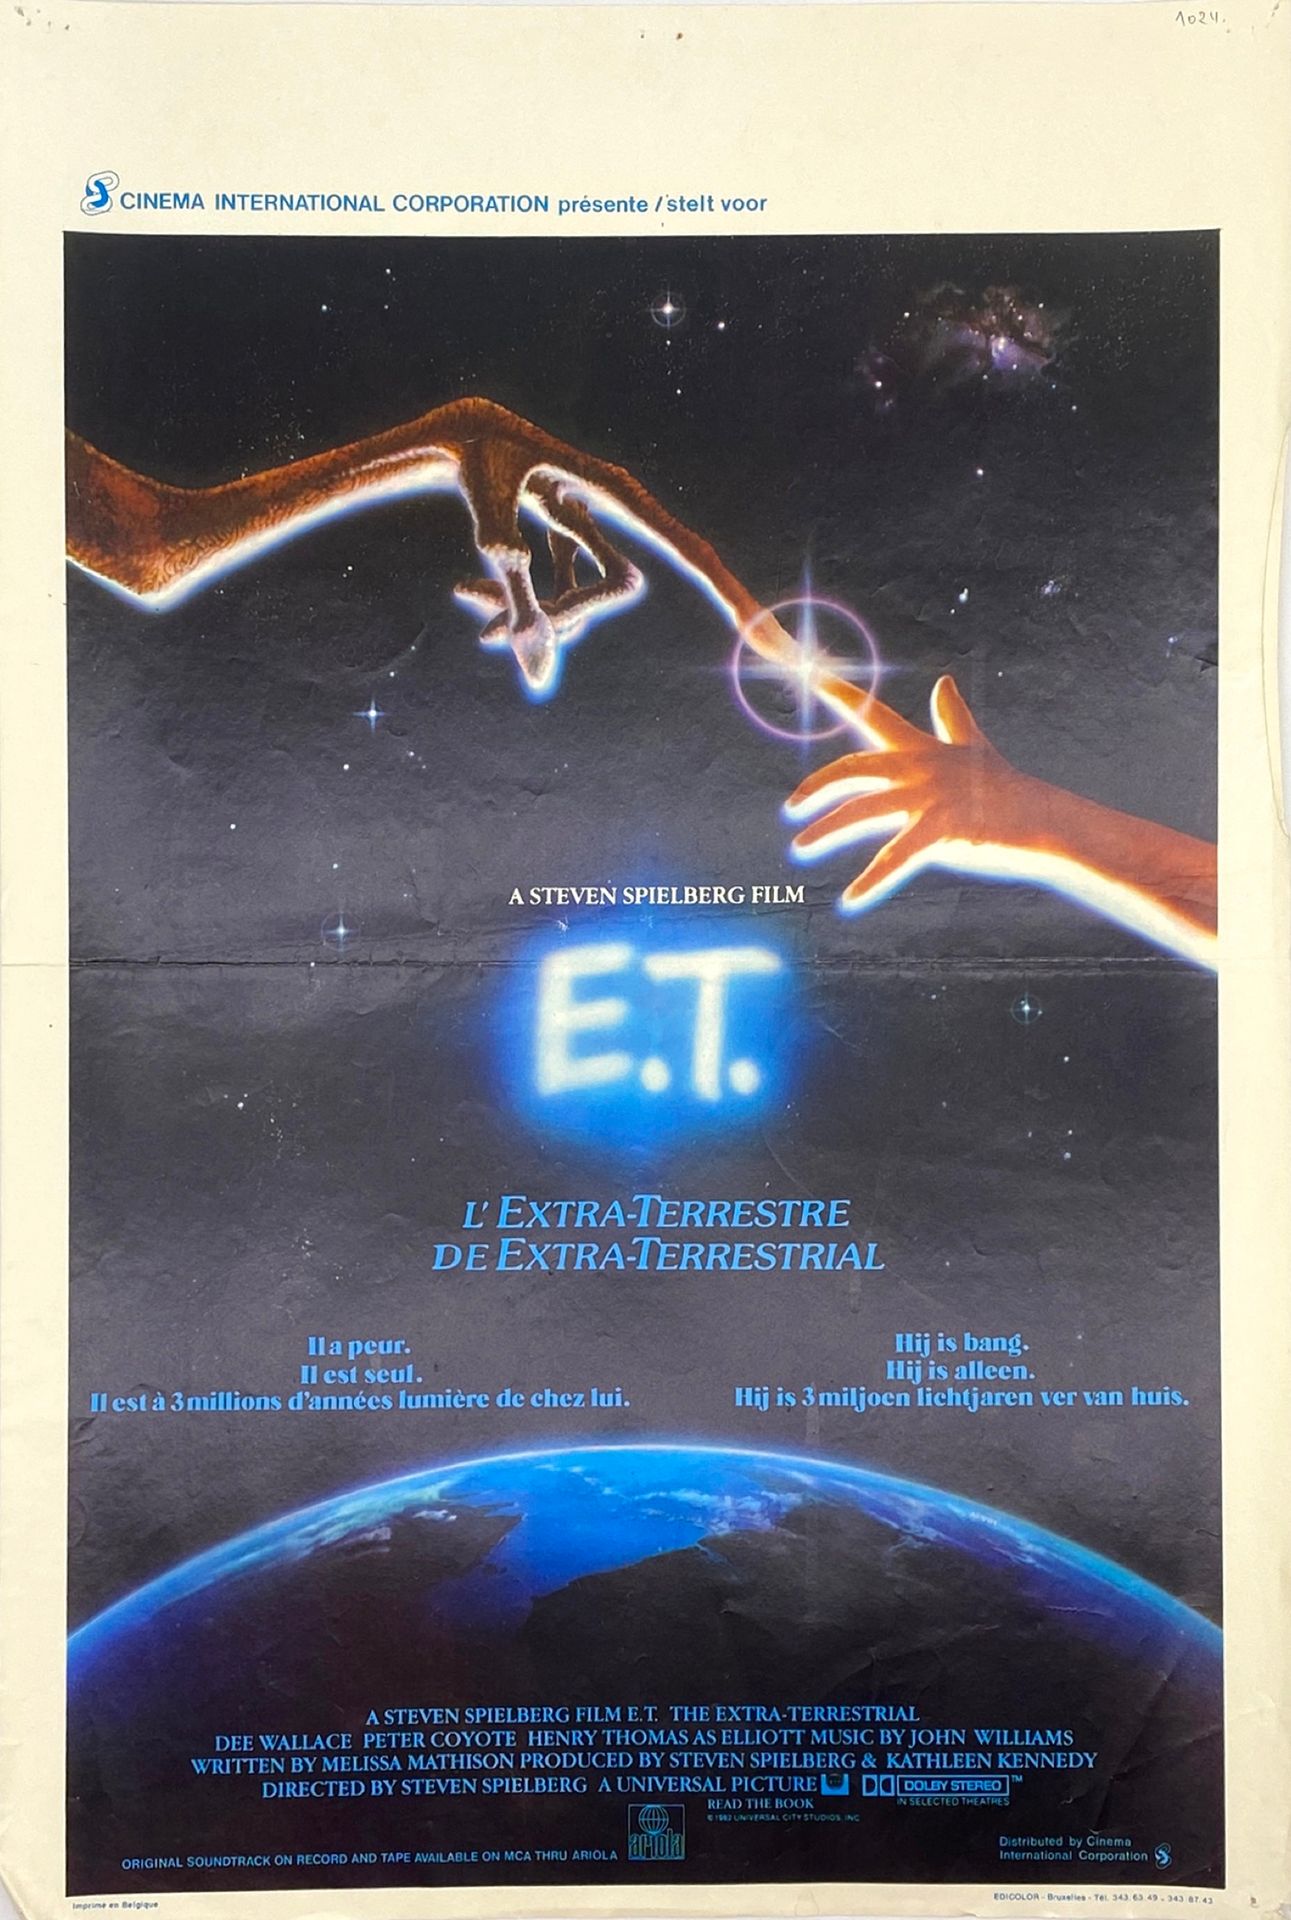 Null 
[CINEMA] - Poster " E.T the extra-terrestrial " by Steven Spielberg. 
Prin&hellip;